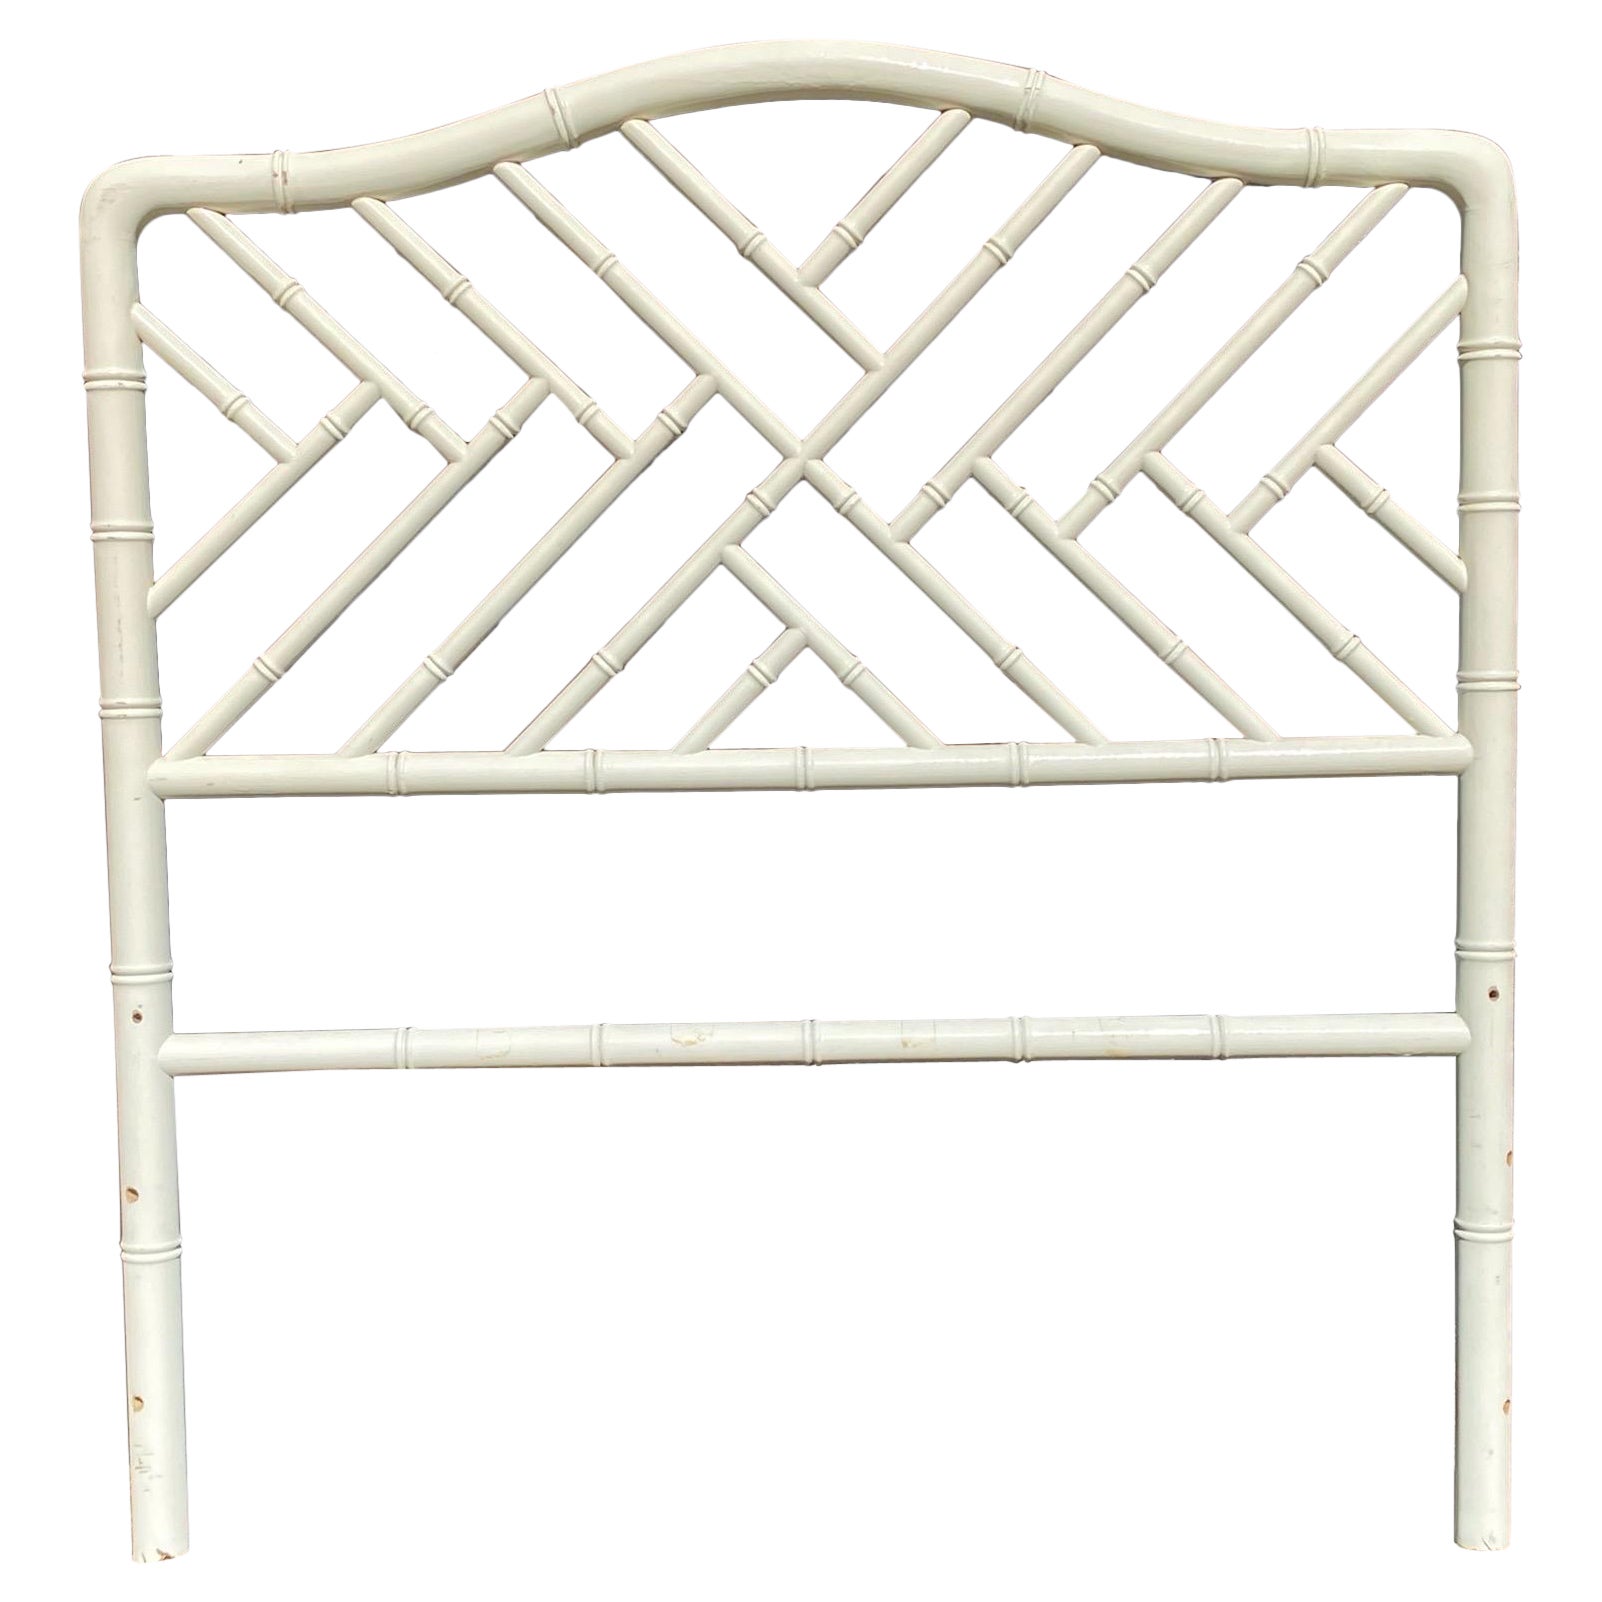 What is the purpose of a headboard?